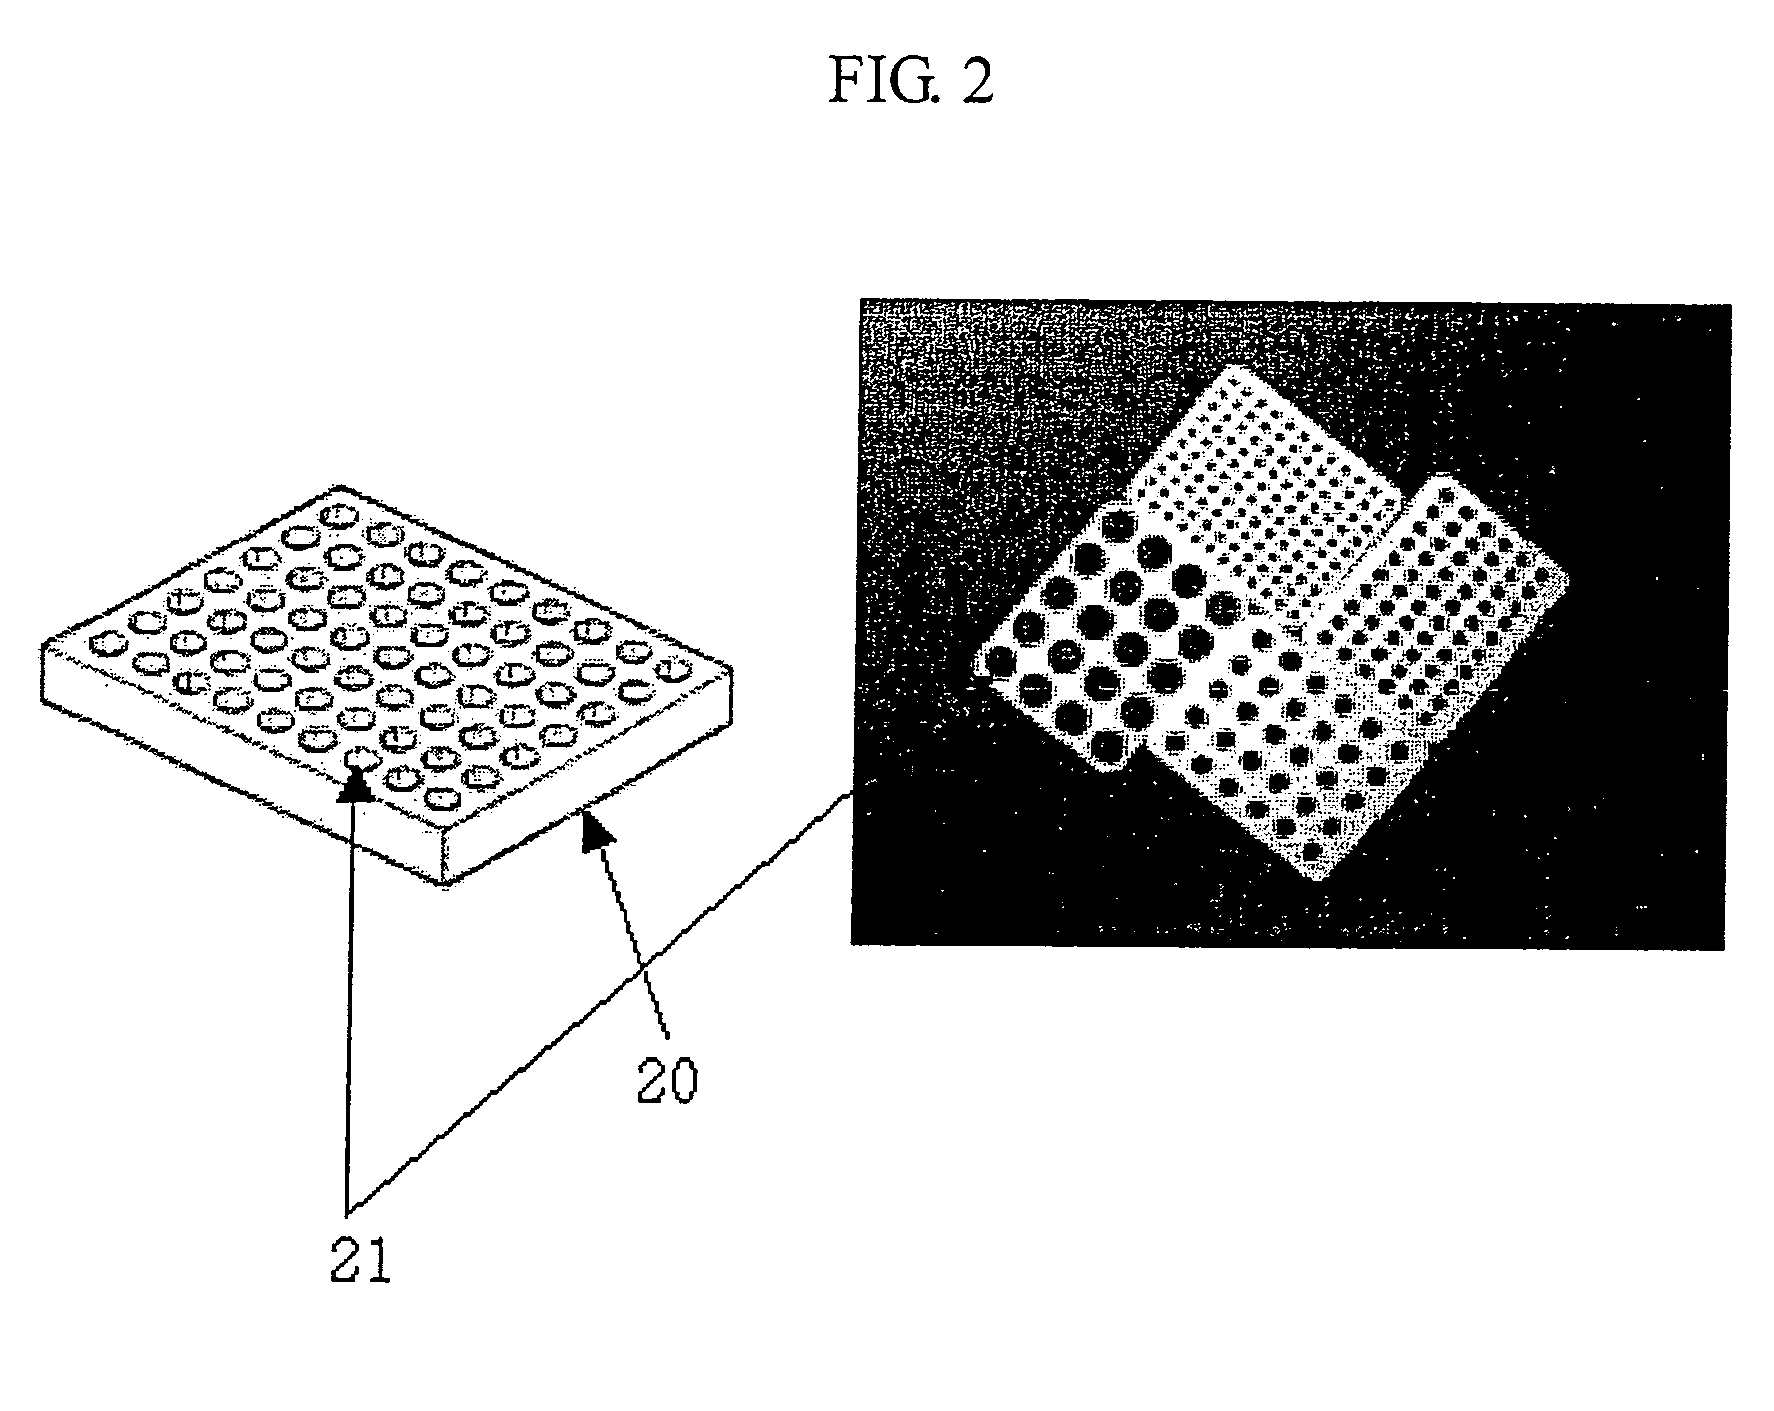 Recipient block and method for preparation thereof